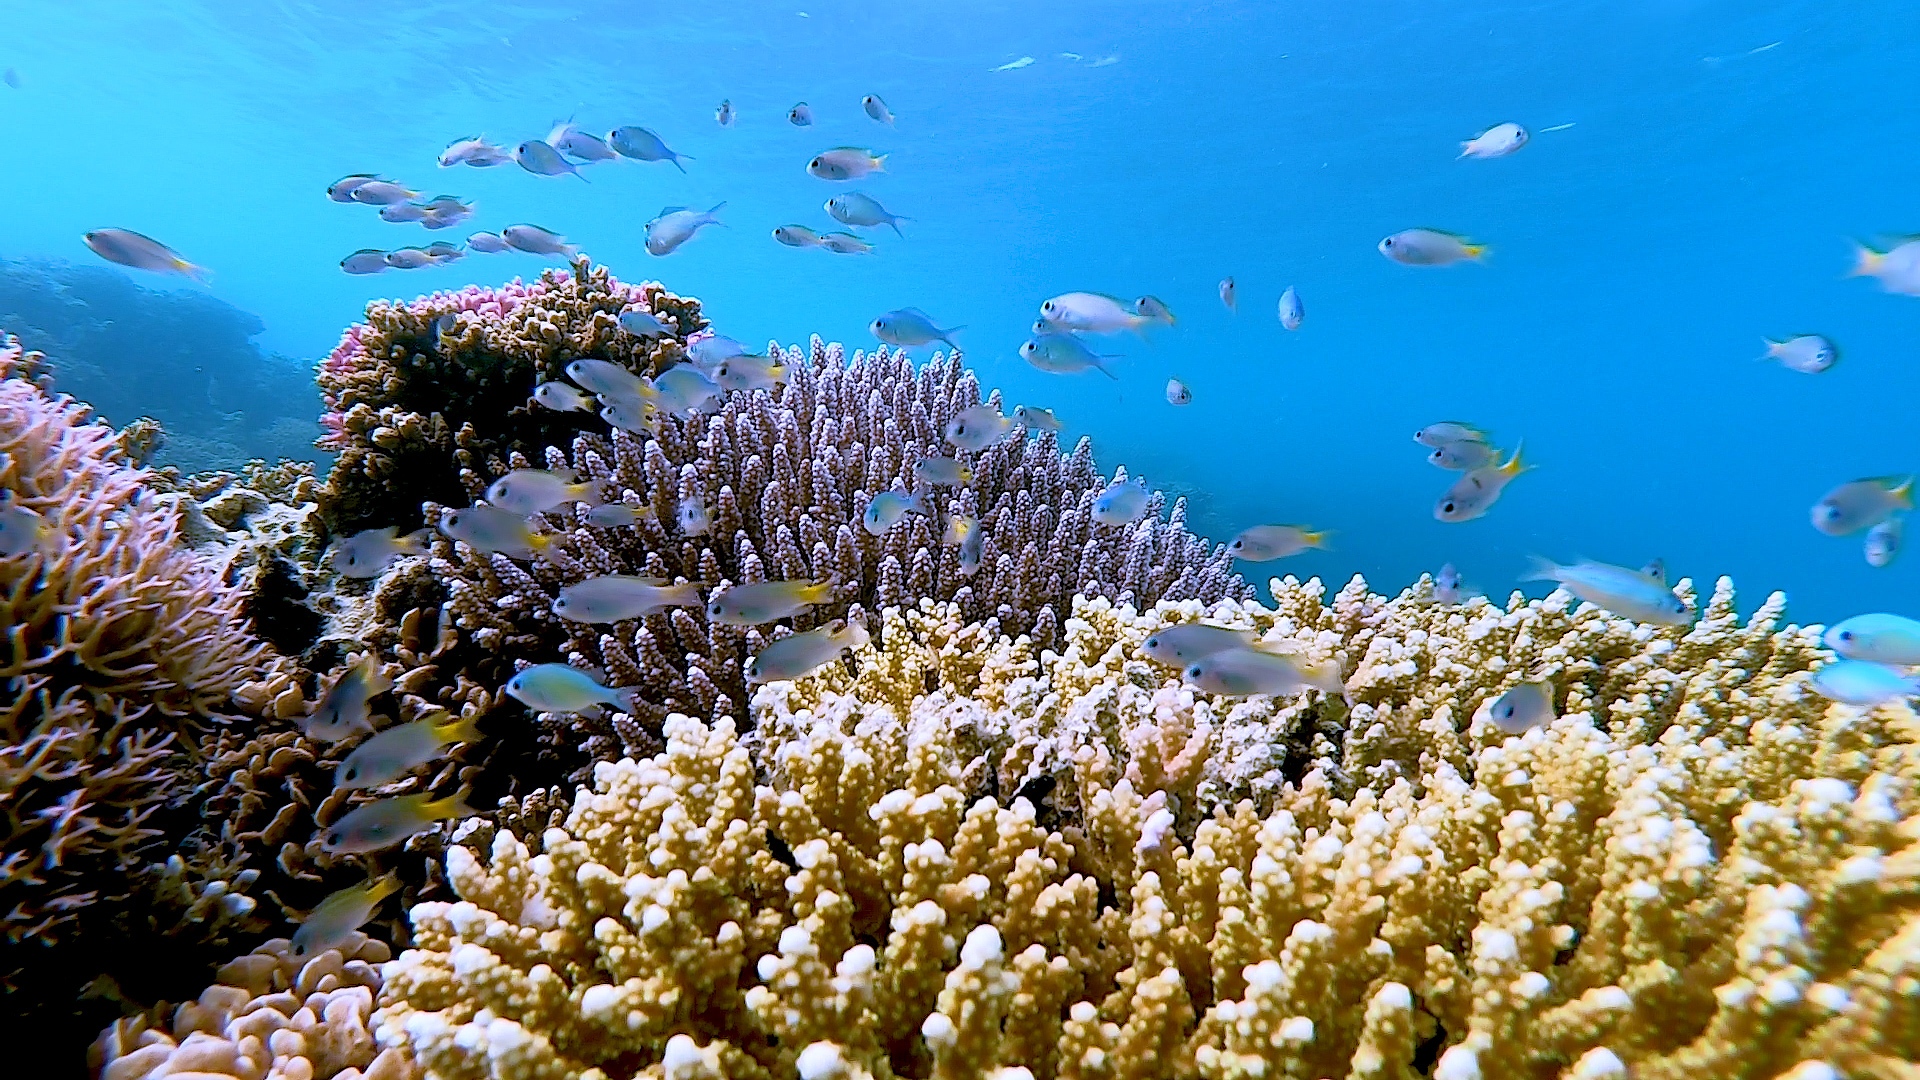 Deep dive to observe Red Sea coral spawning